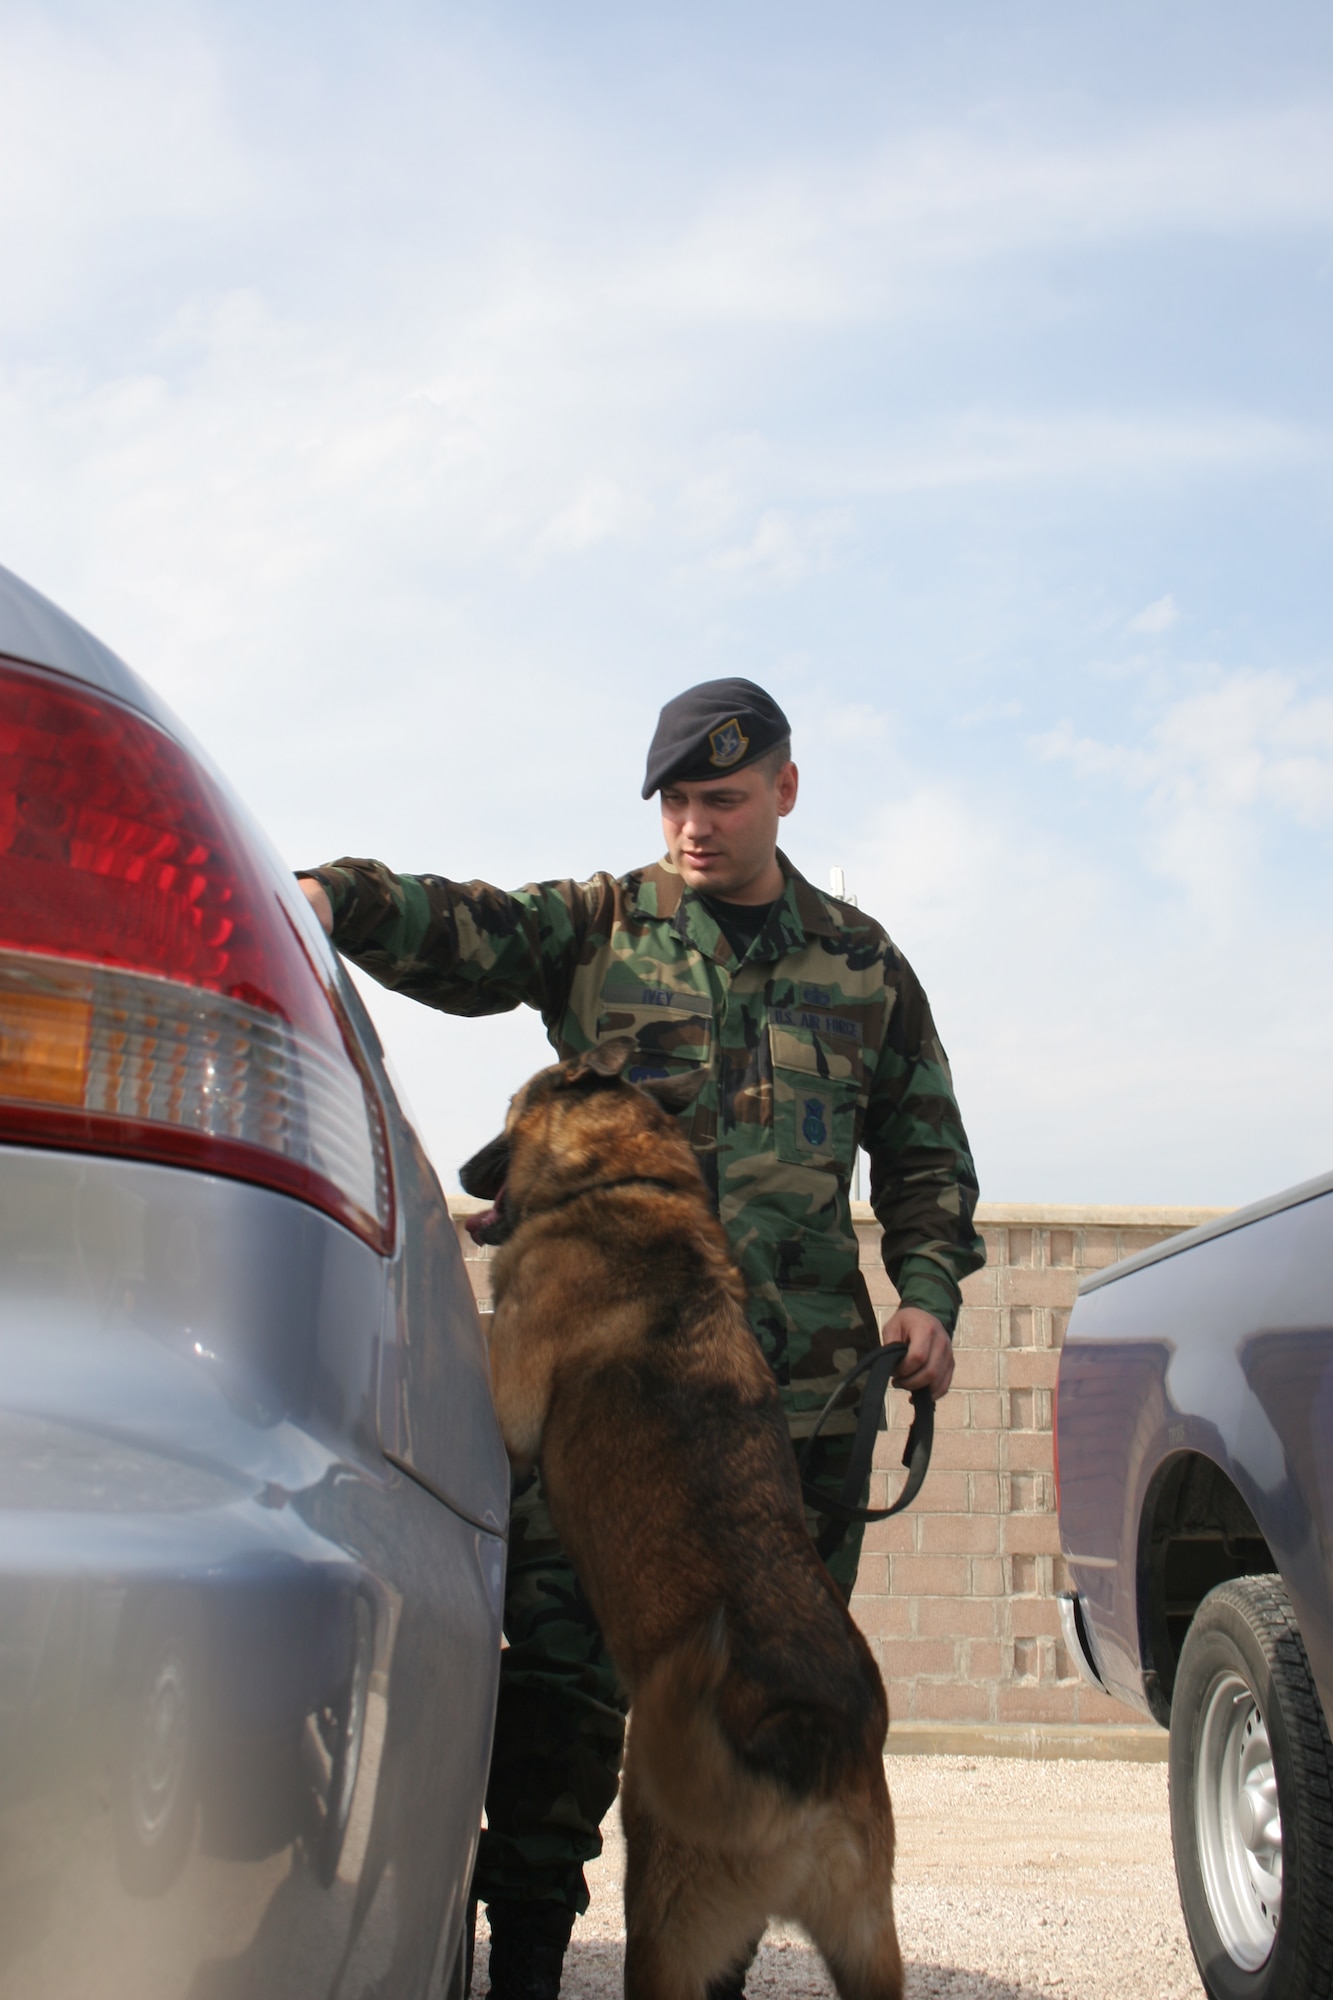 Staff Sgt. Alonzo Ivey, 39th Security Forces Squadron military working dog handler, does a vehicle check with his partner Robby Oct. 31. Robby has been working with the Air Force for more than 10 years. Robby, like all military working dogs have an important job of checking for contraband on vehicles and places. (U.S. Air Force photo by Senior Airman Patrice Clarke)